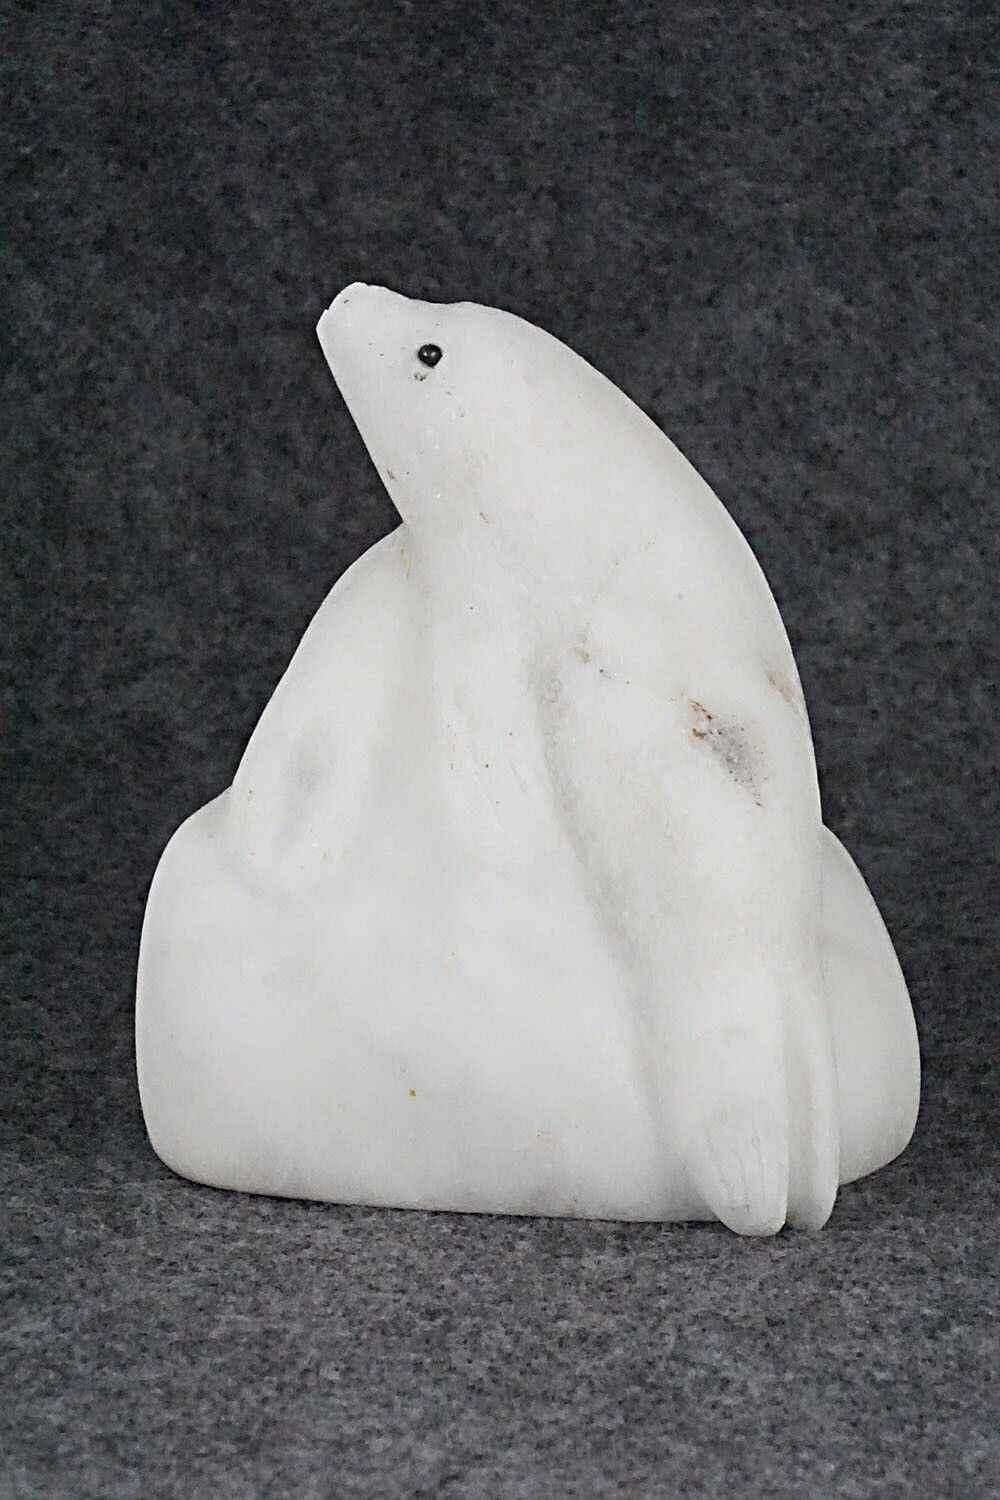 Seal and Pup Zuni Fetish Carving - Wilfred Cheama